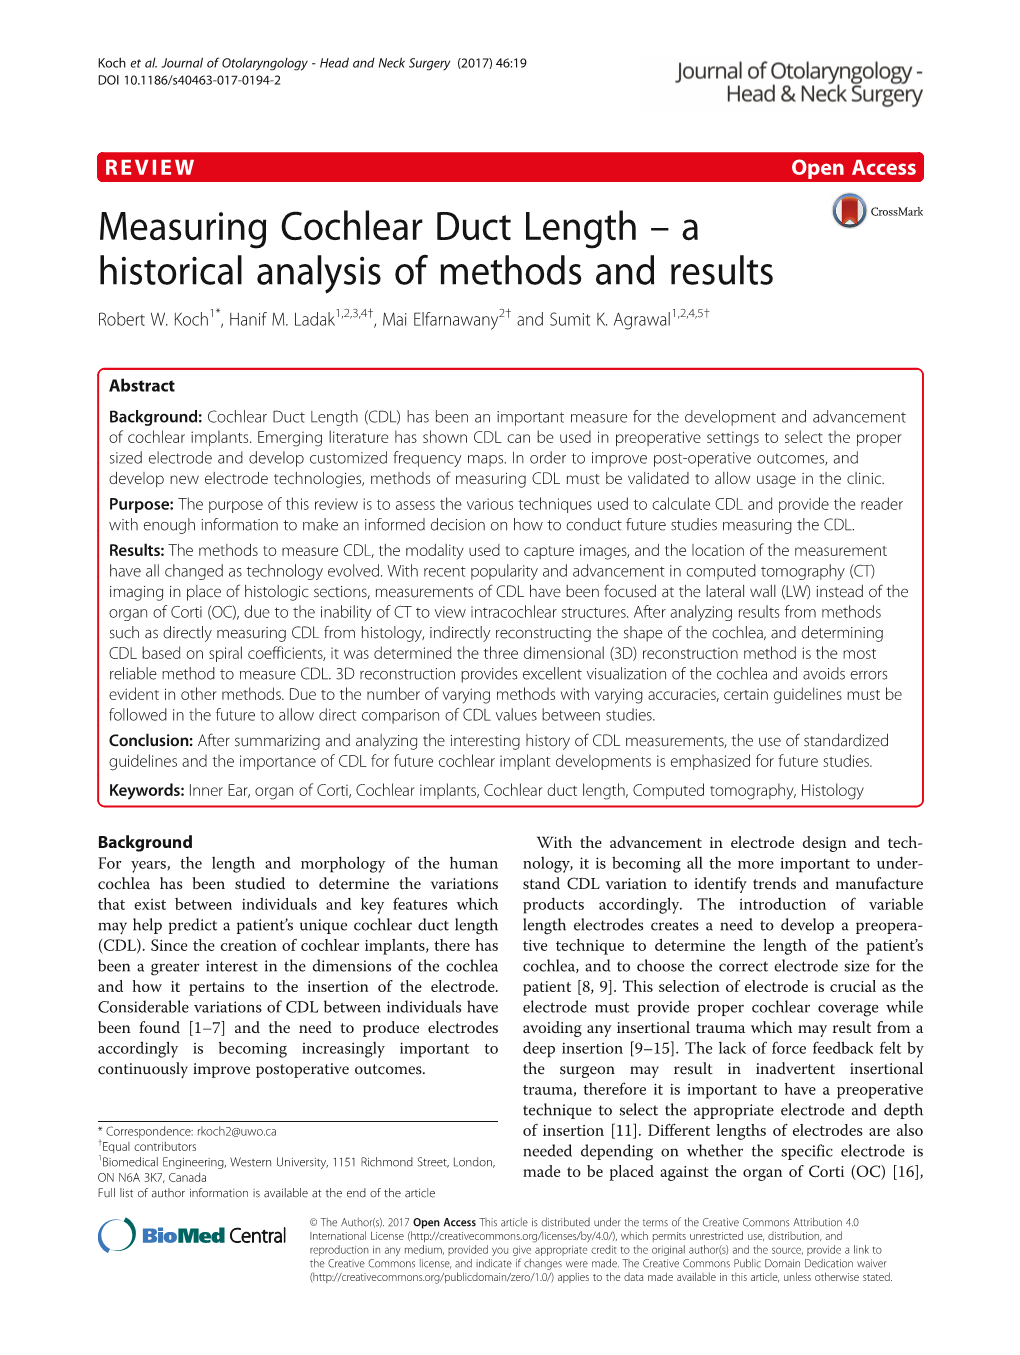 Measuring Cochlear Duct Length – a Historical Analysis of Methods and Results Robert W